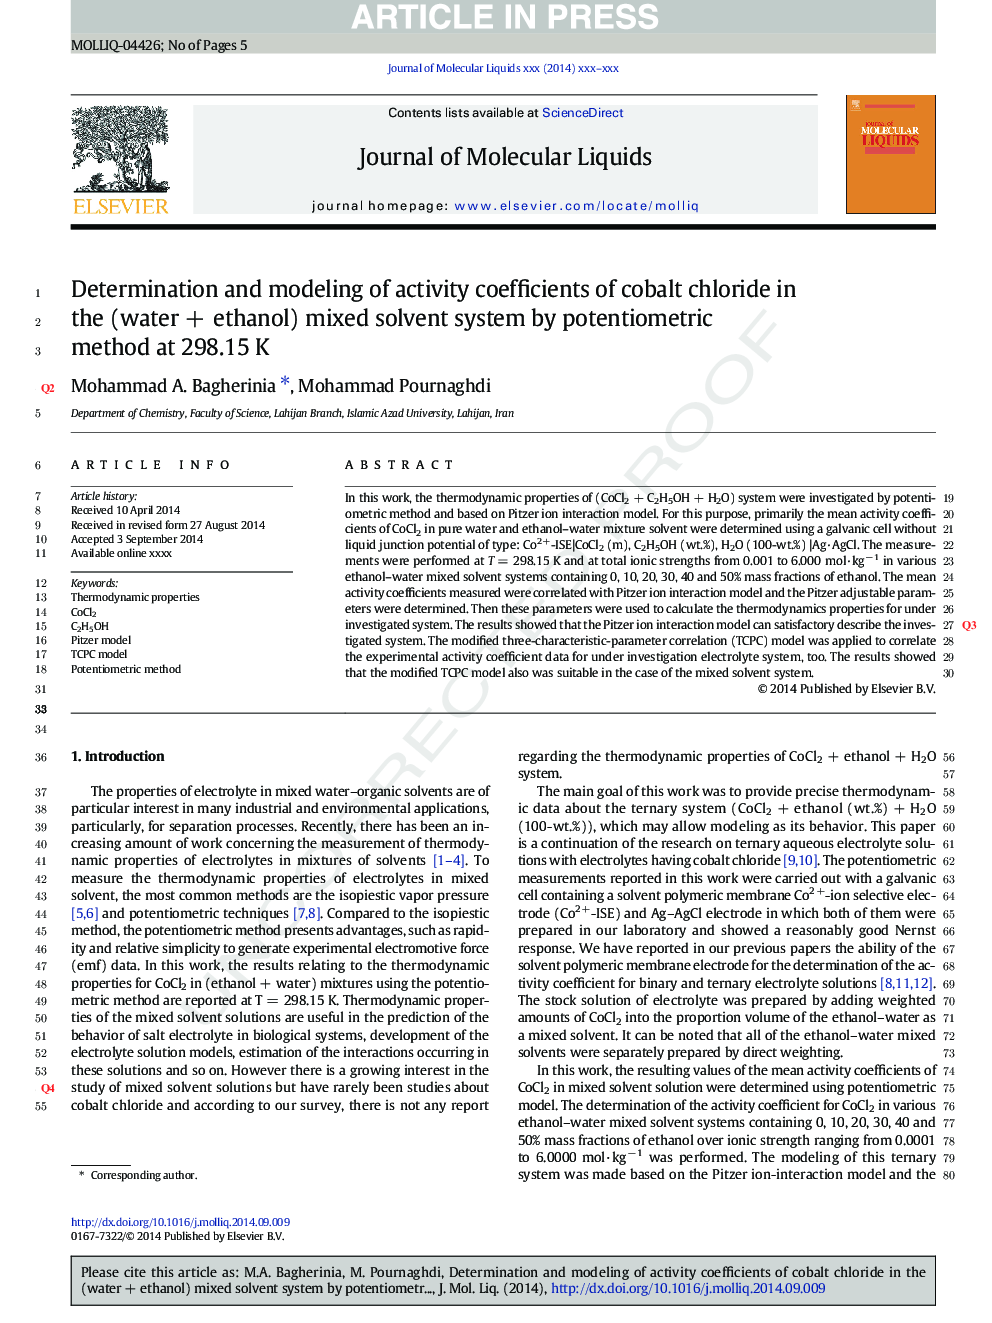 Determination and modeling of activity coefficients of cobalt chloride in the (waterÂ +Â ethanol) mixed solvent system by potentiometric method at 298.15Â K